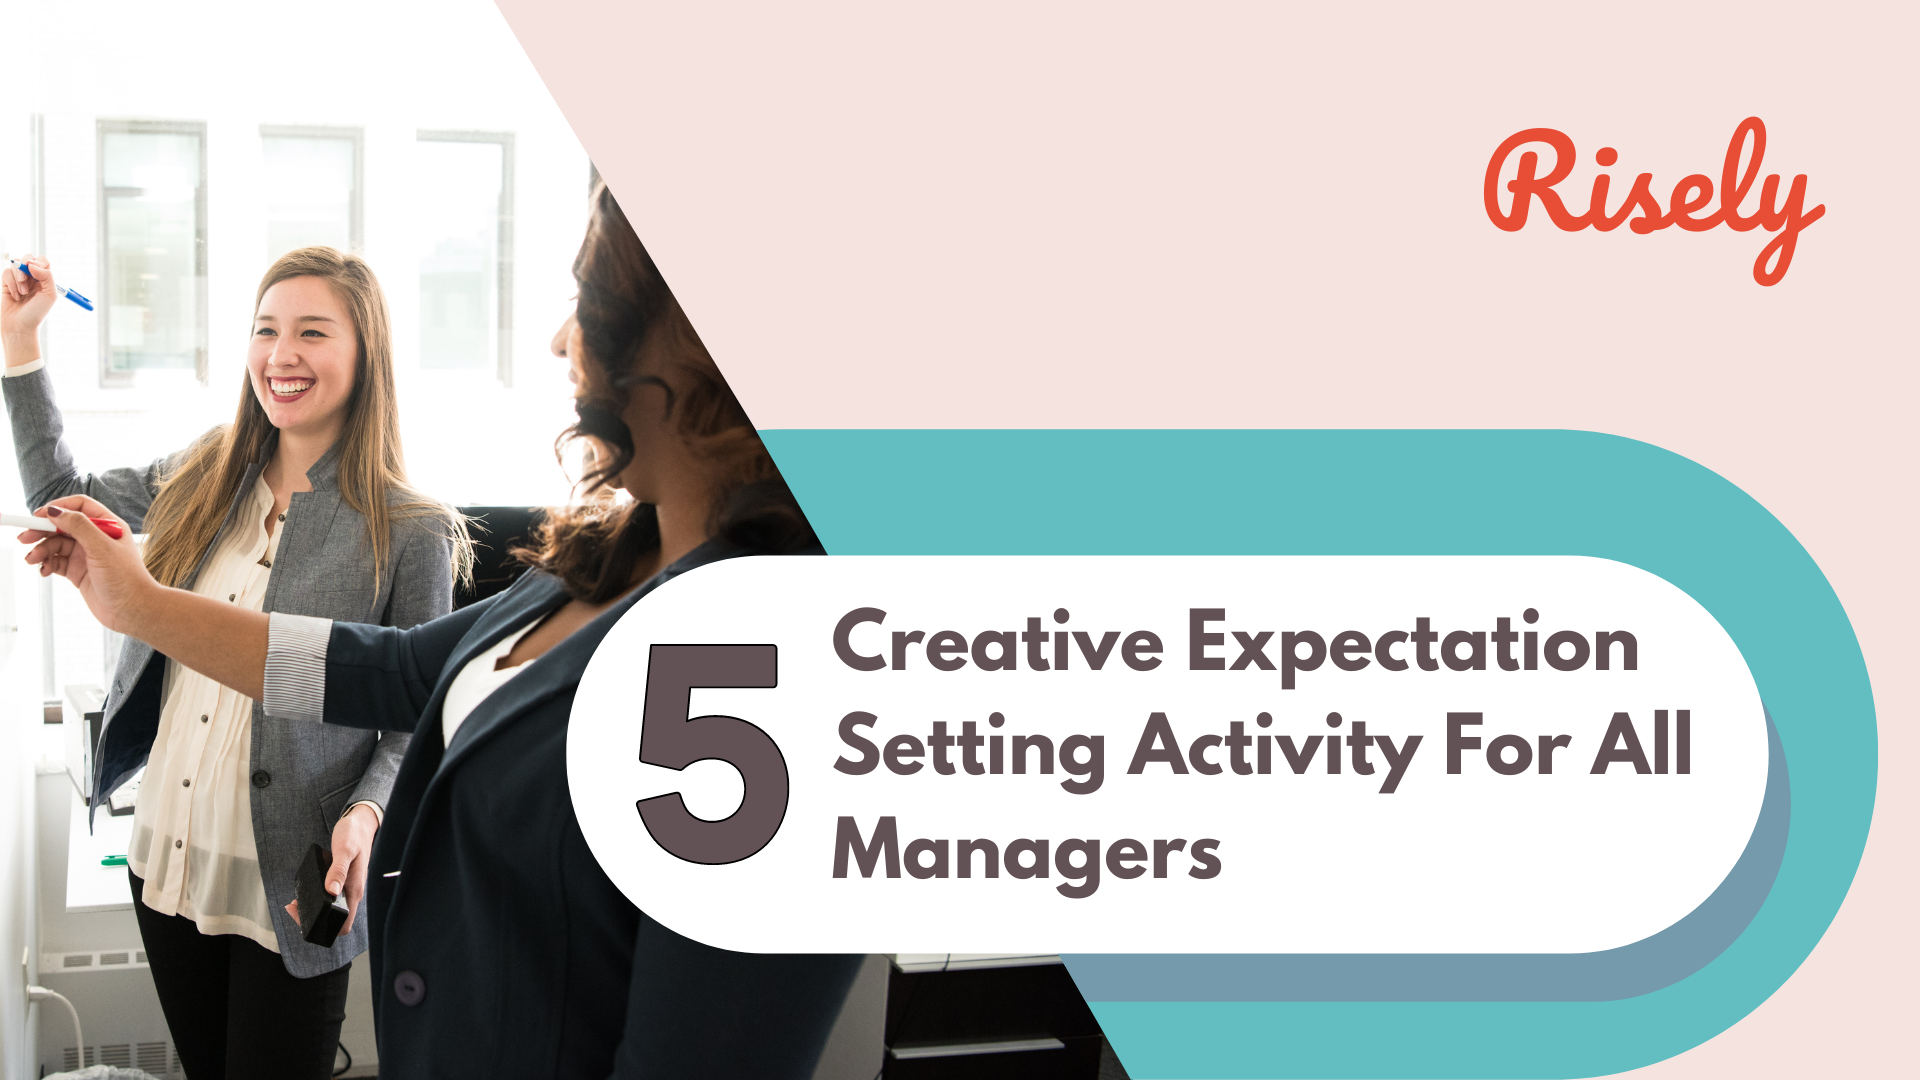 5 Creative Expectation Setting Activity For All Managers